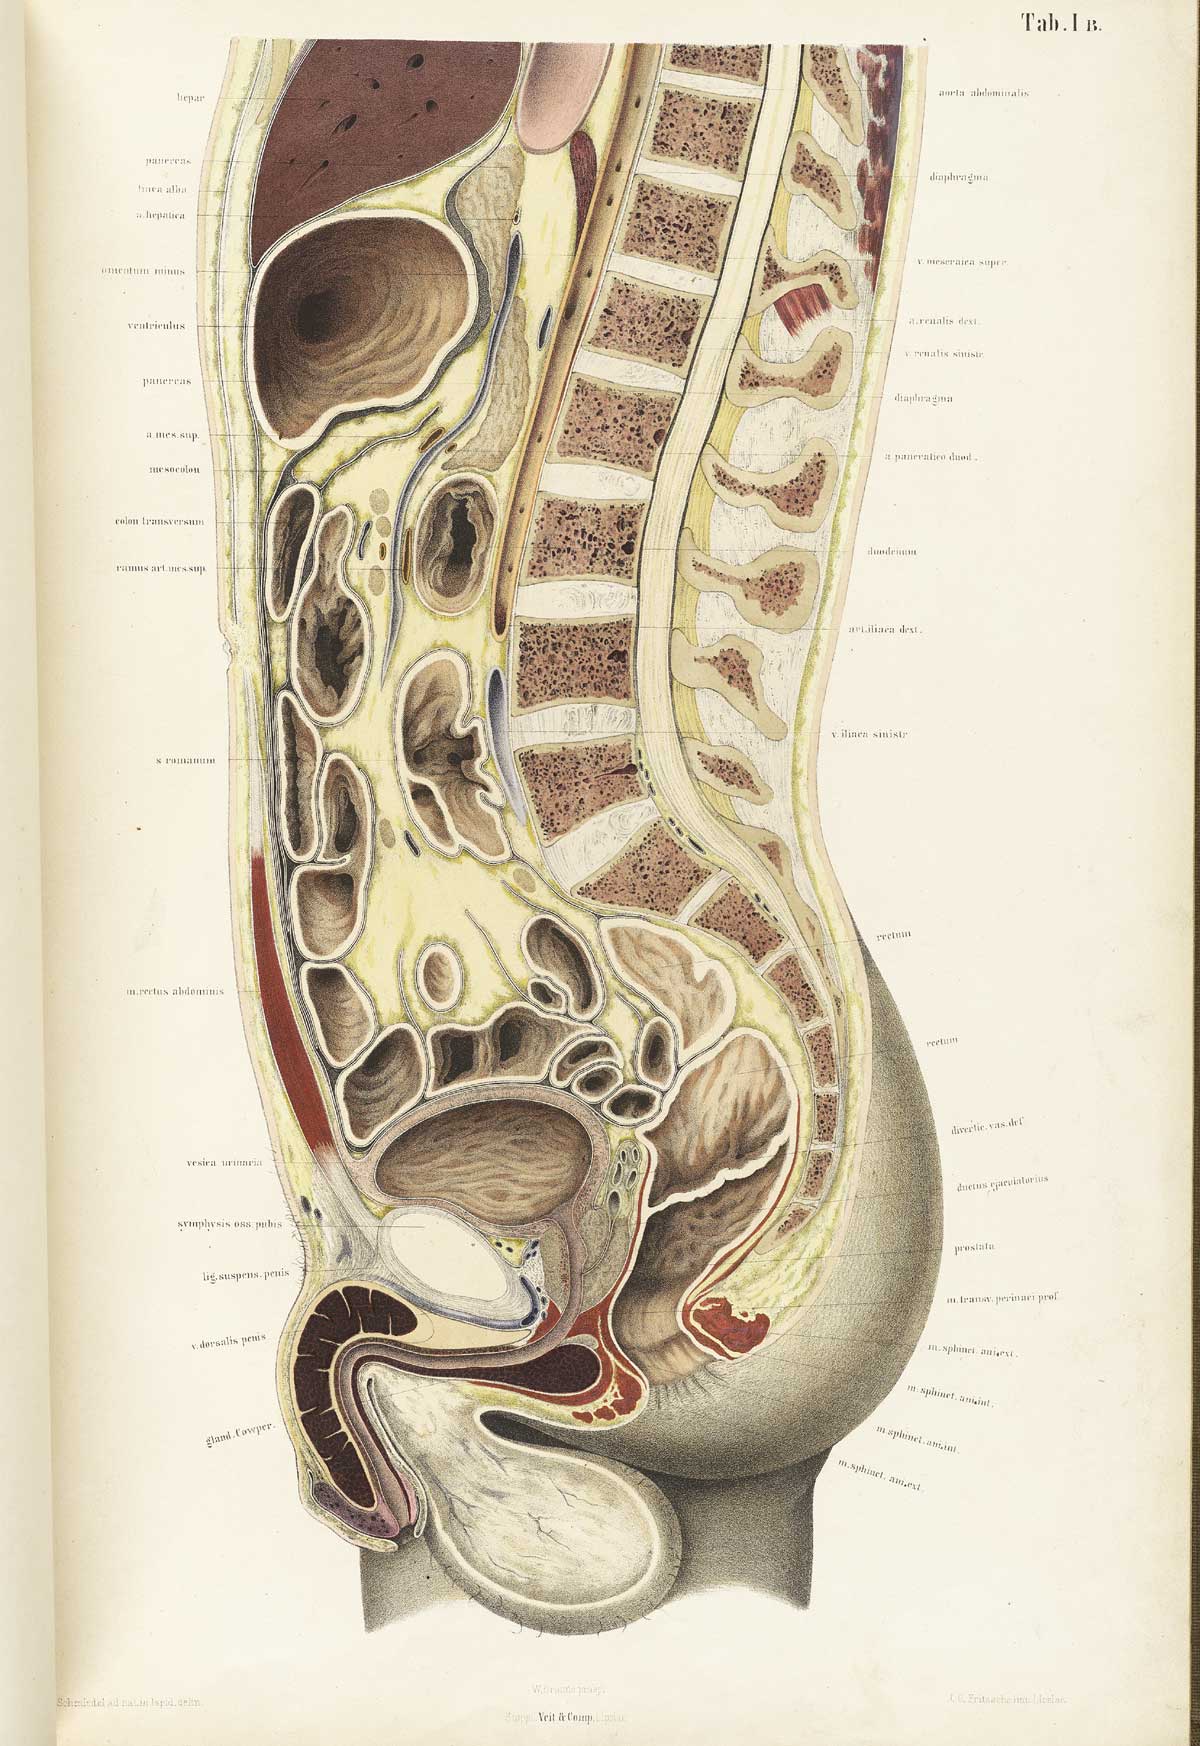 Chromolithograph of the cross-section of an adult male abdomen of an individual facing to the left, exposing the stomach, intestines, bladder, male reproductive system, and other organs and structures, from Wilhelm Braune’s Topographisch-anatomischer Atlas. Leipzig, 1867.